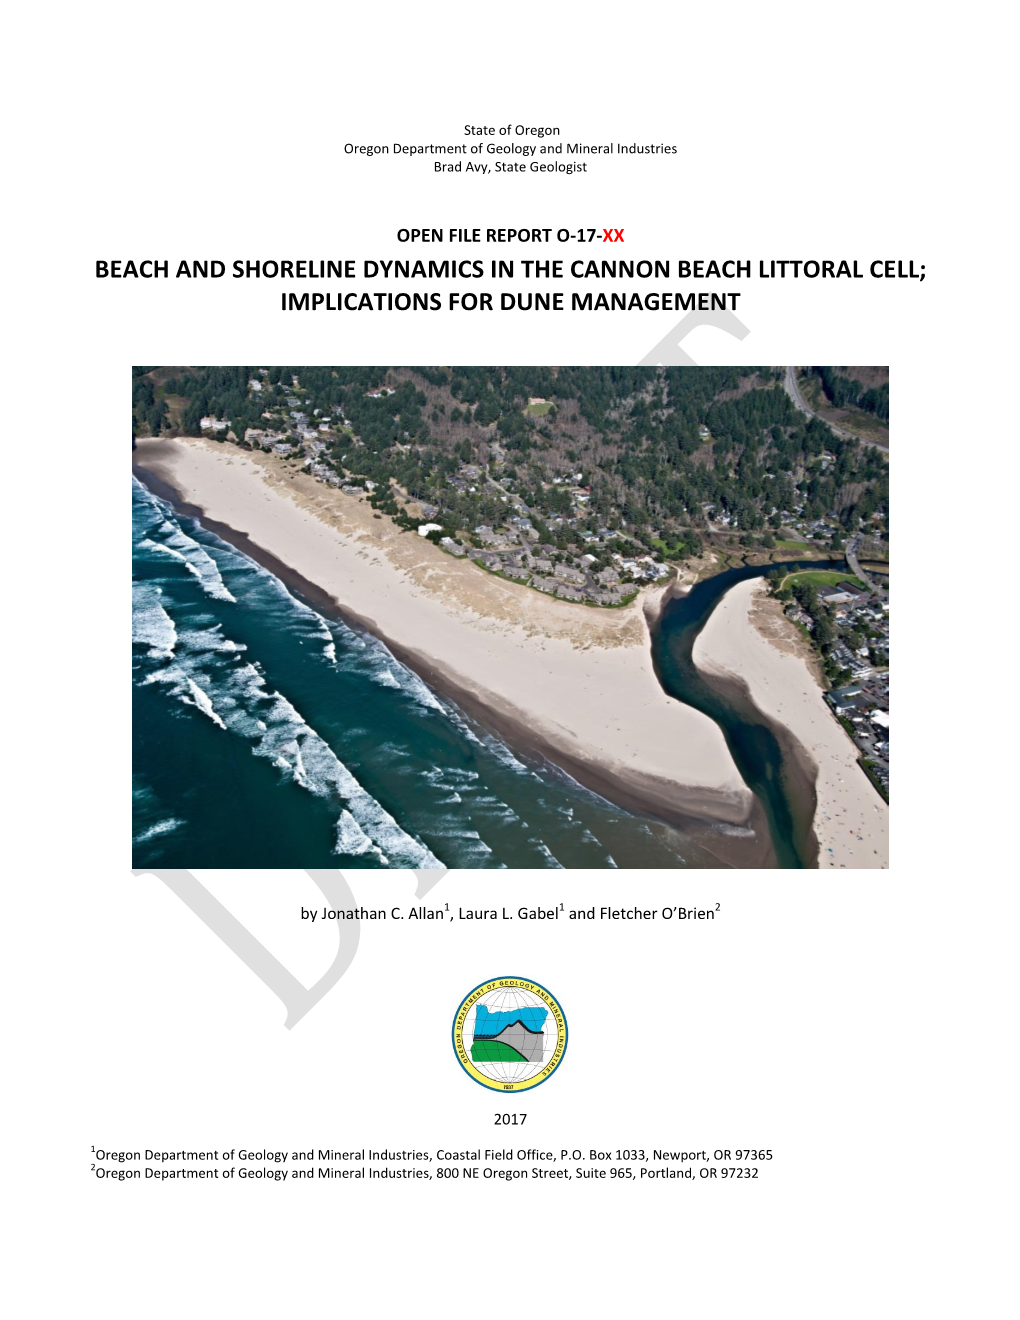 Beach and Shoreline Dynamics in the Cannon Beach Littoral Cell; Implications for Dune Management